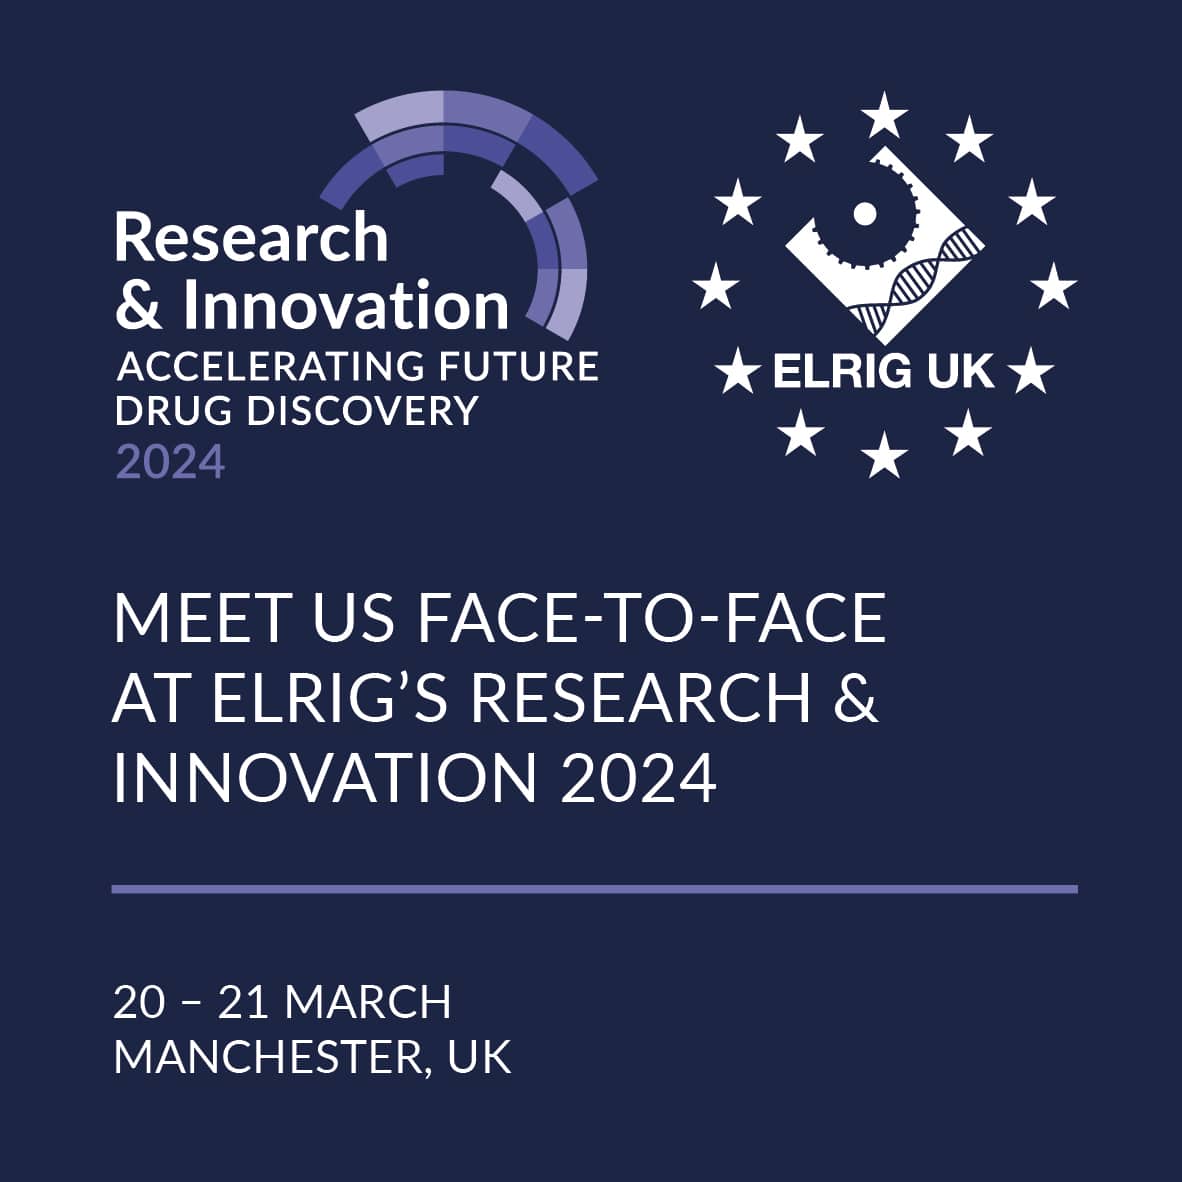 Meet us face-to-face at ELRIG's Research and Innovation 2024 20 - 21 March Manchester, UK